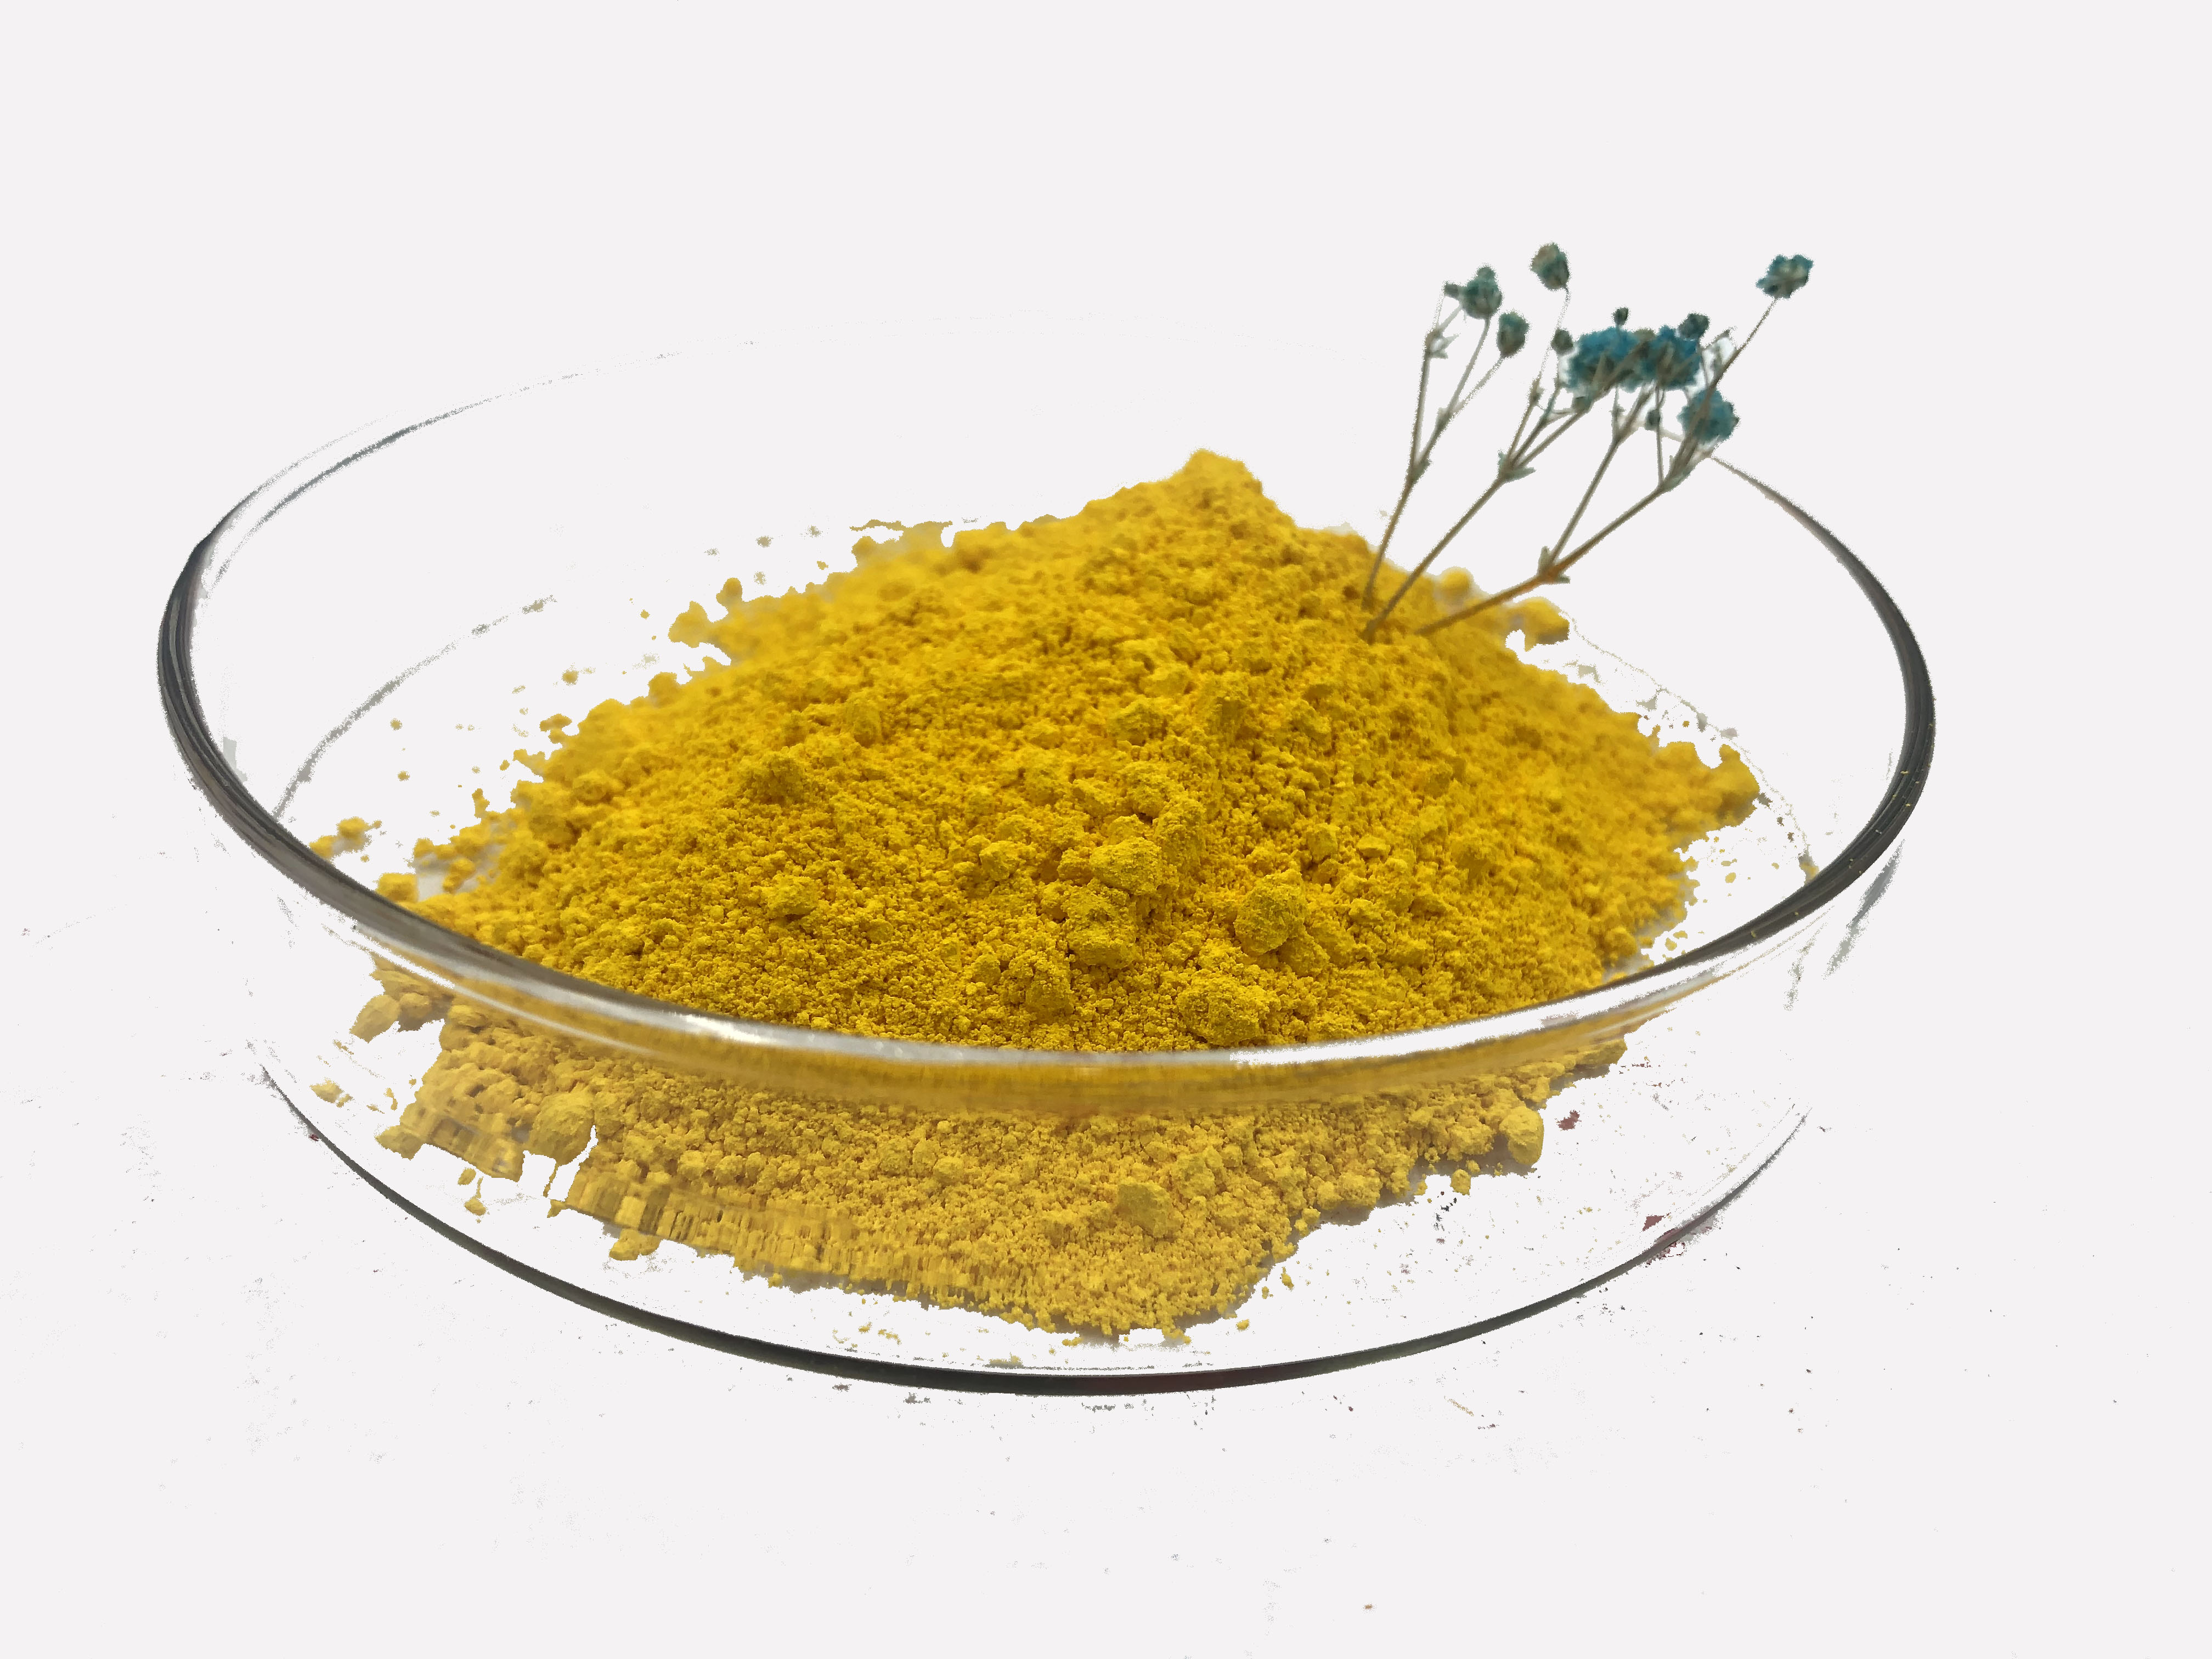 Pigment Yellow 180 For PVC Coloring Excellent Dispersion With High Sun Resistance And High Heat Resistance 